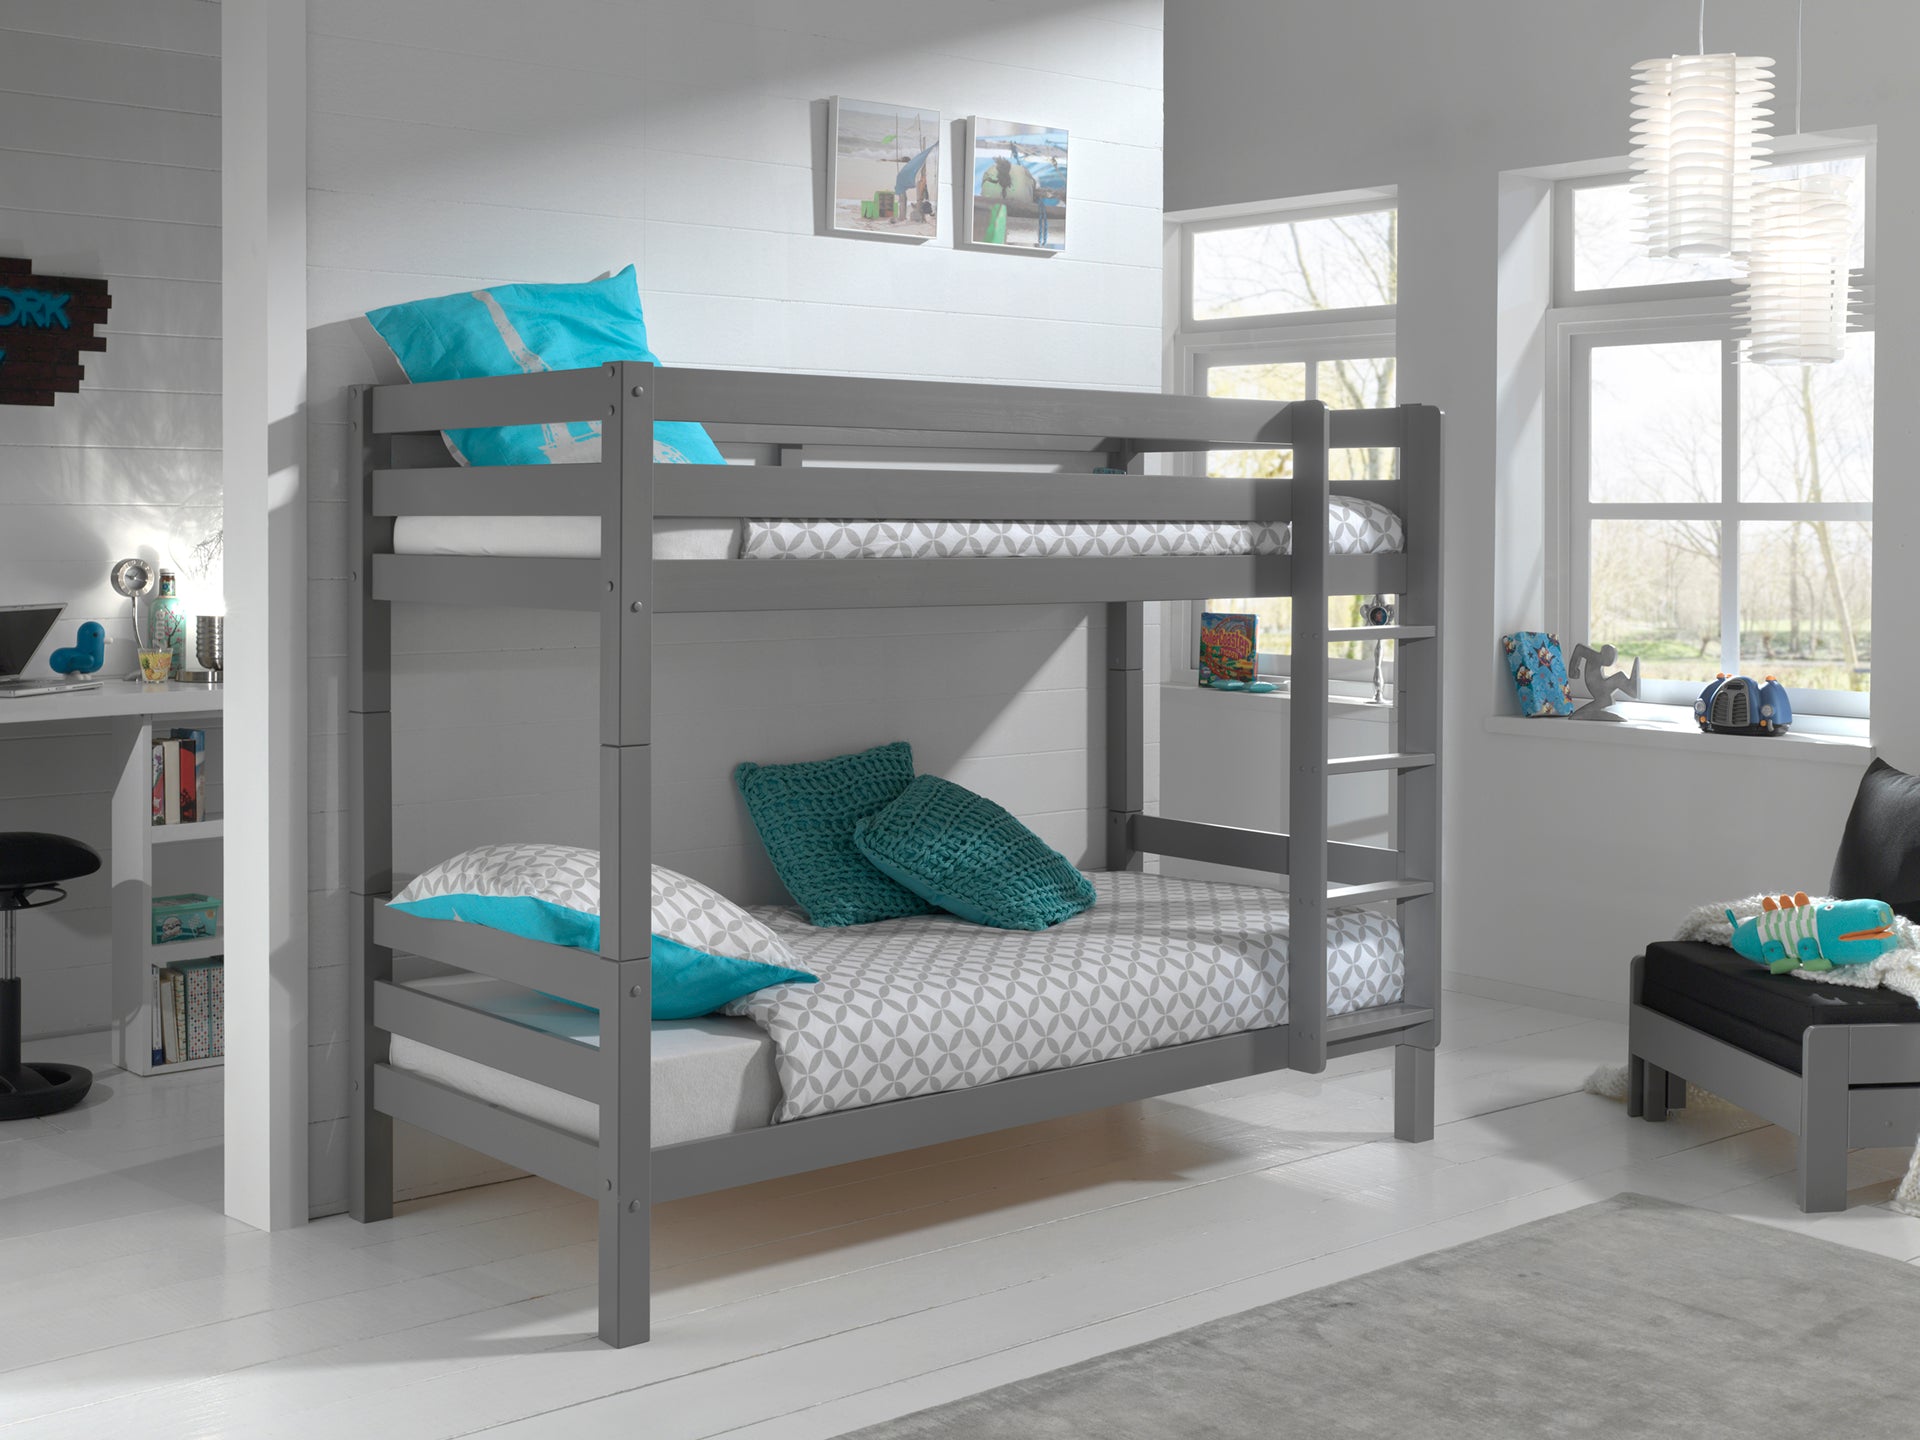 Vipack Pino Kids Bunk Bed - 160cm Height - Grey